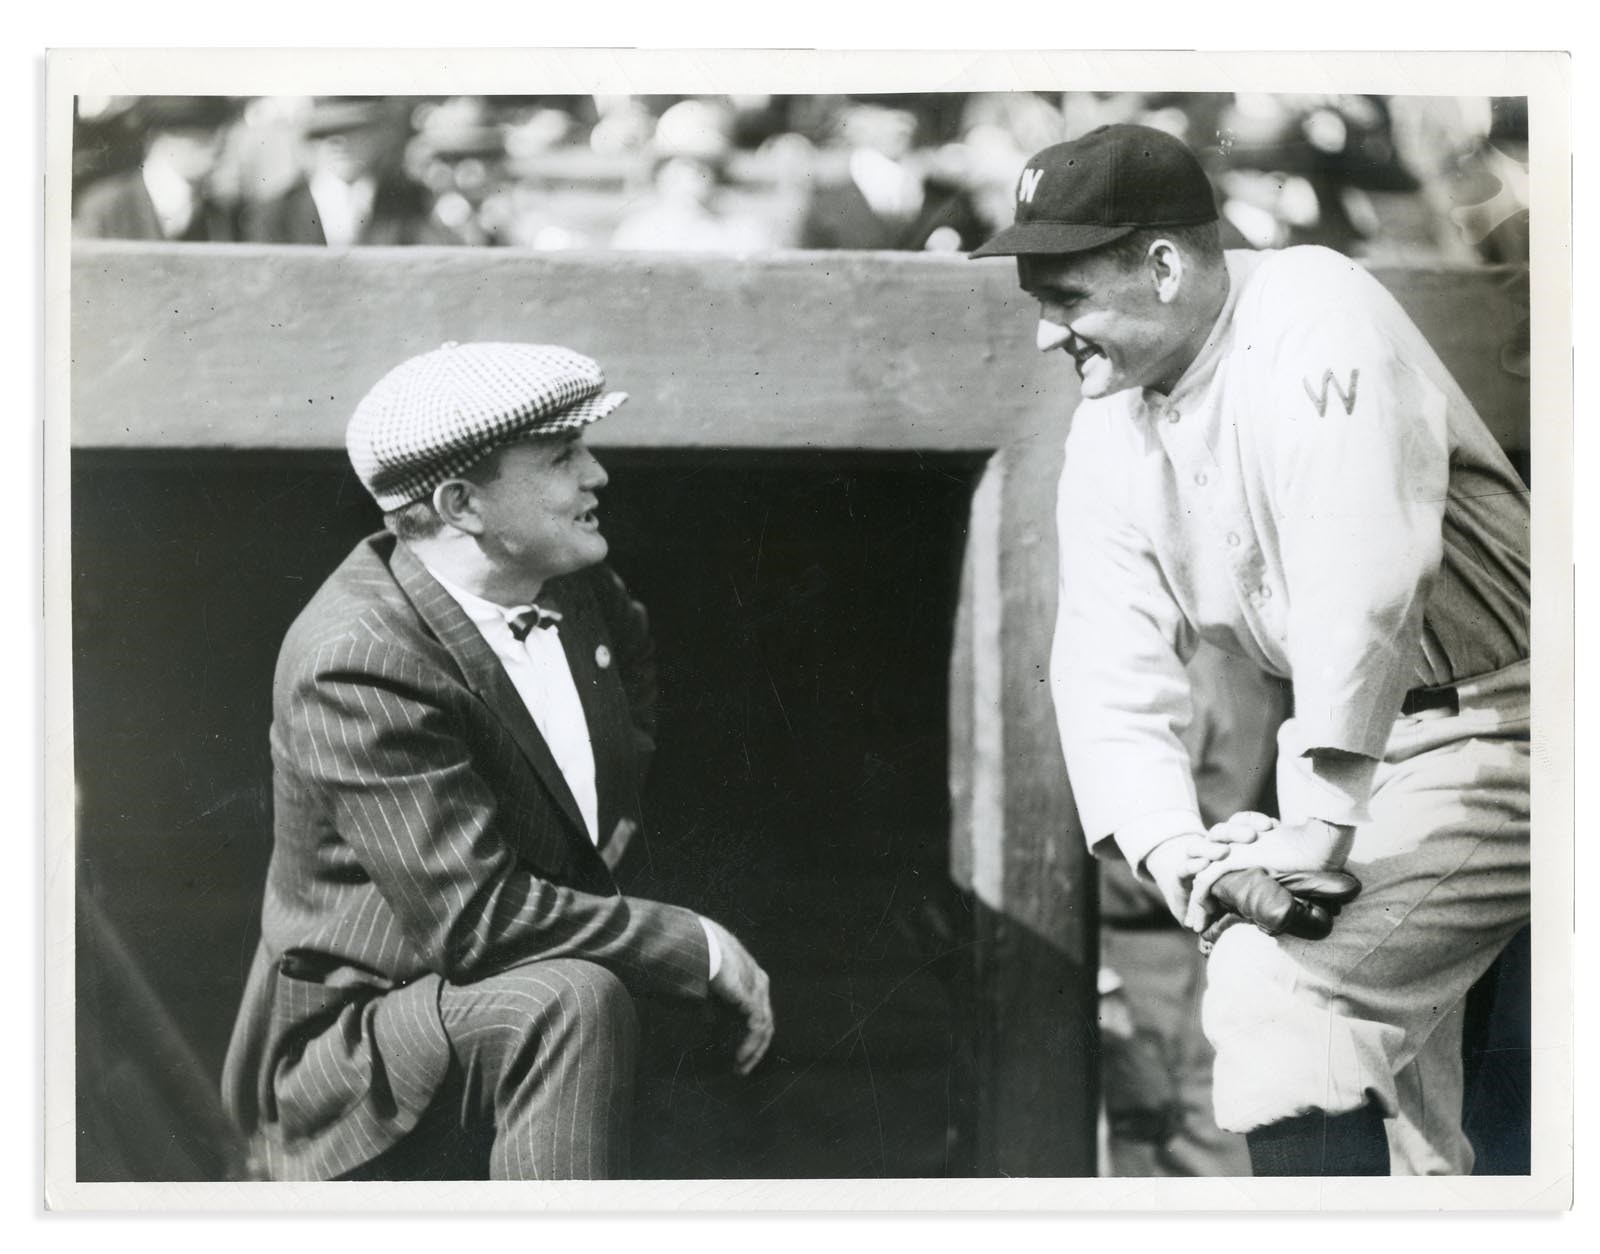 Vintage Sports Photographs - 1929 Walter Johnson and Billy Evans by Louis Van Oeyen